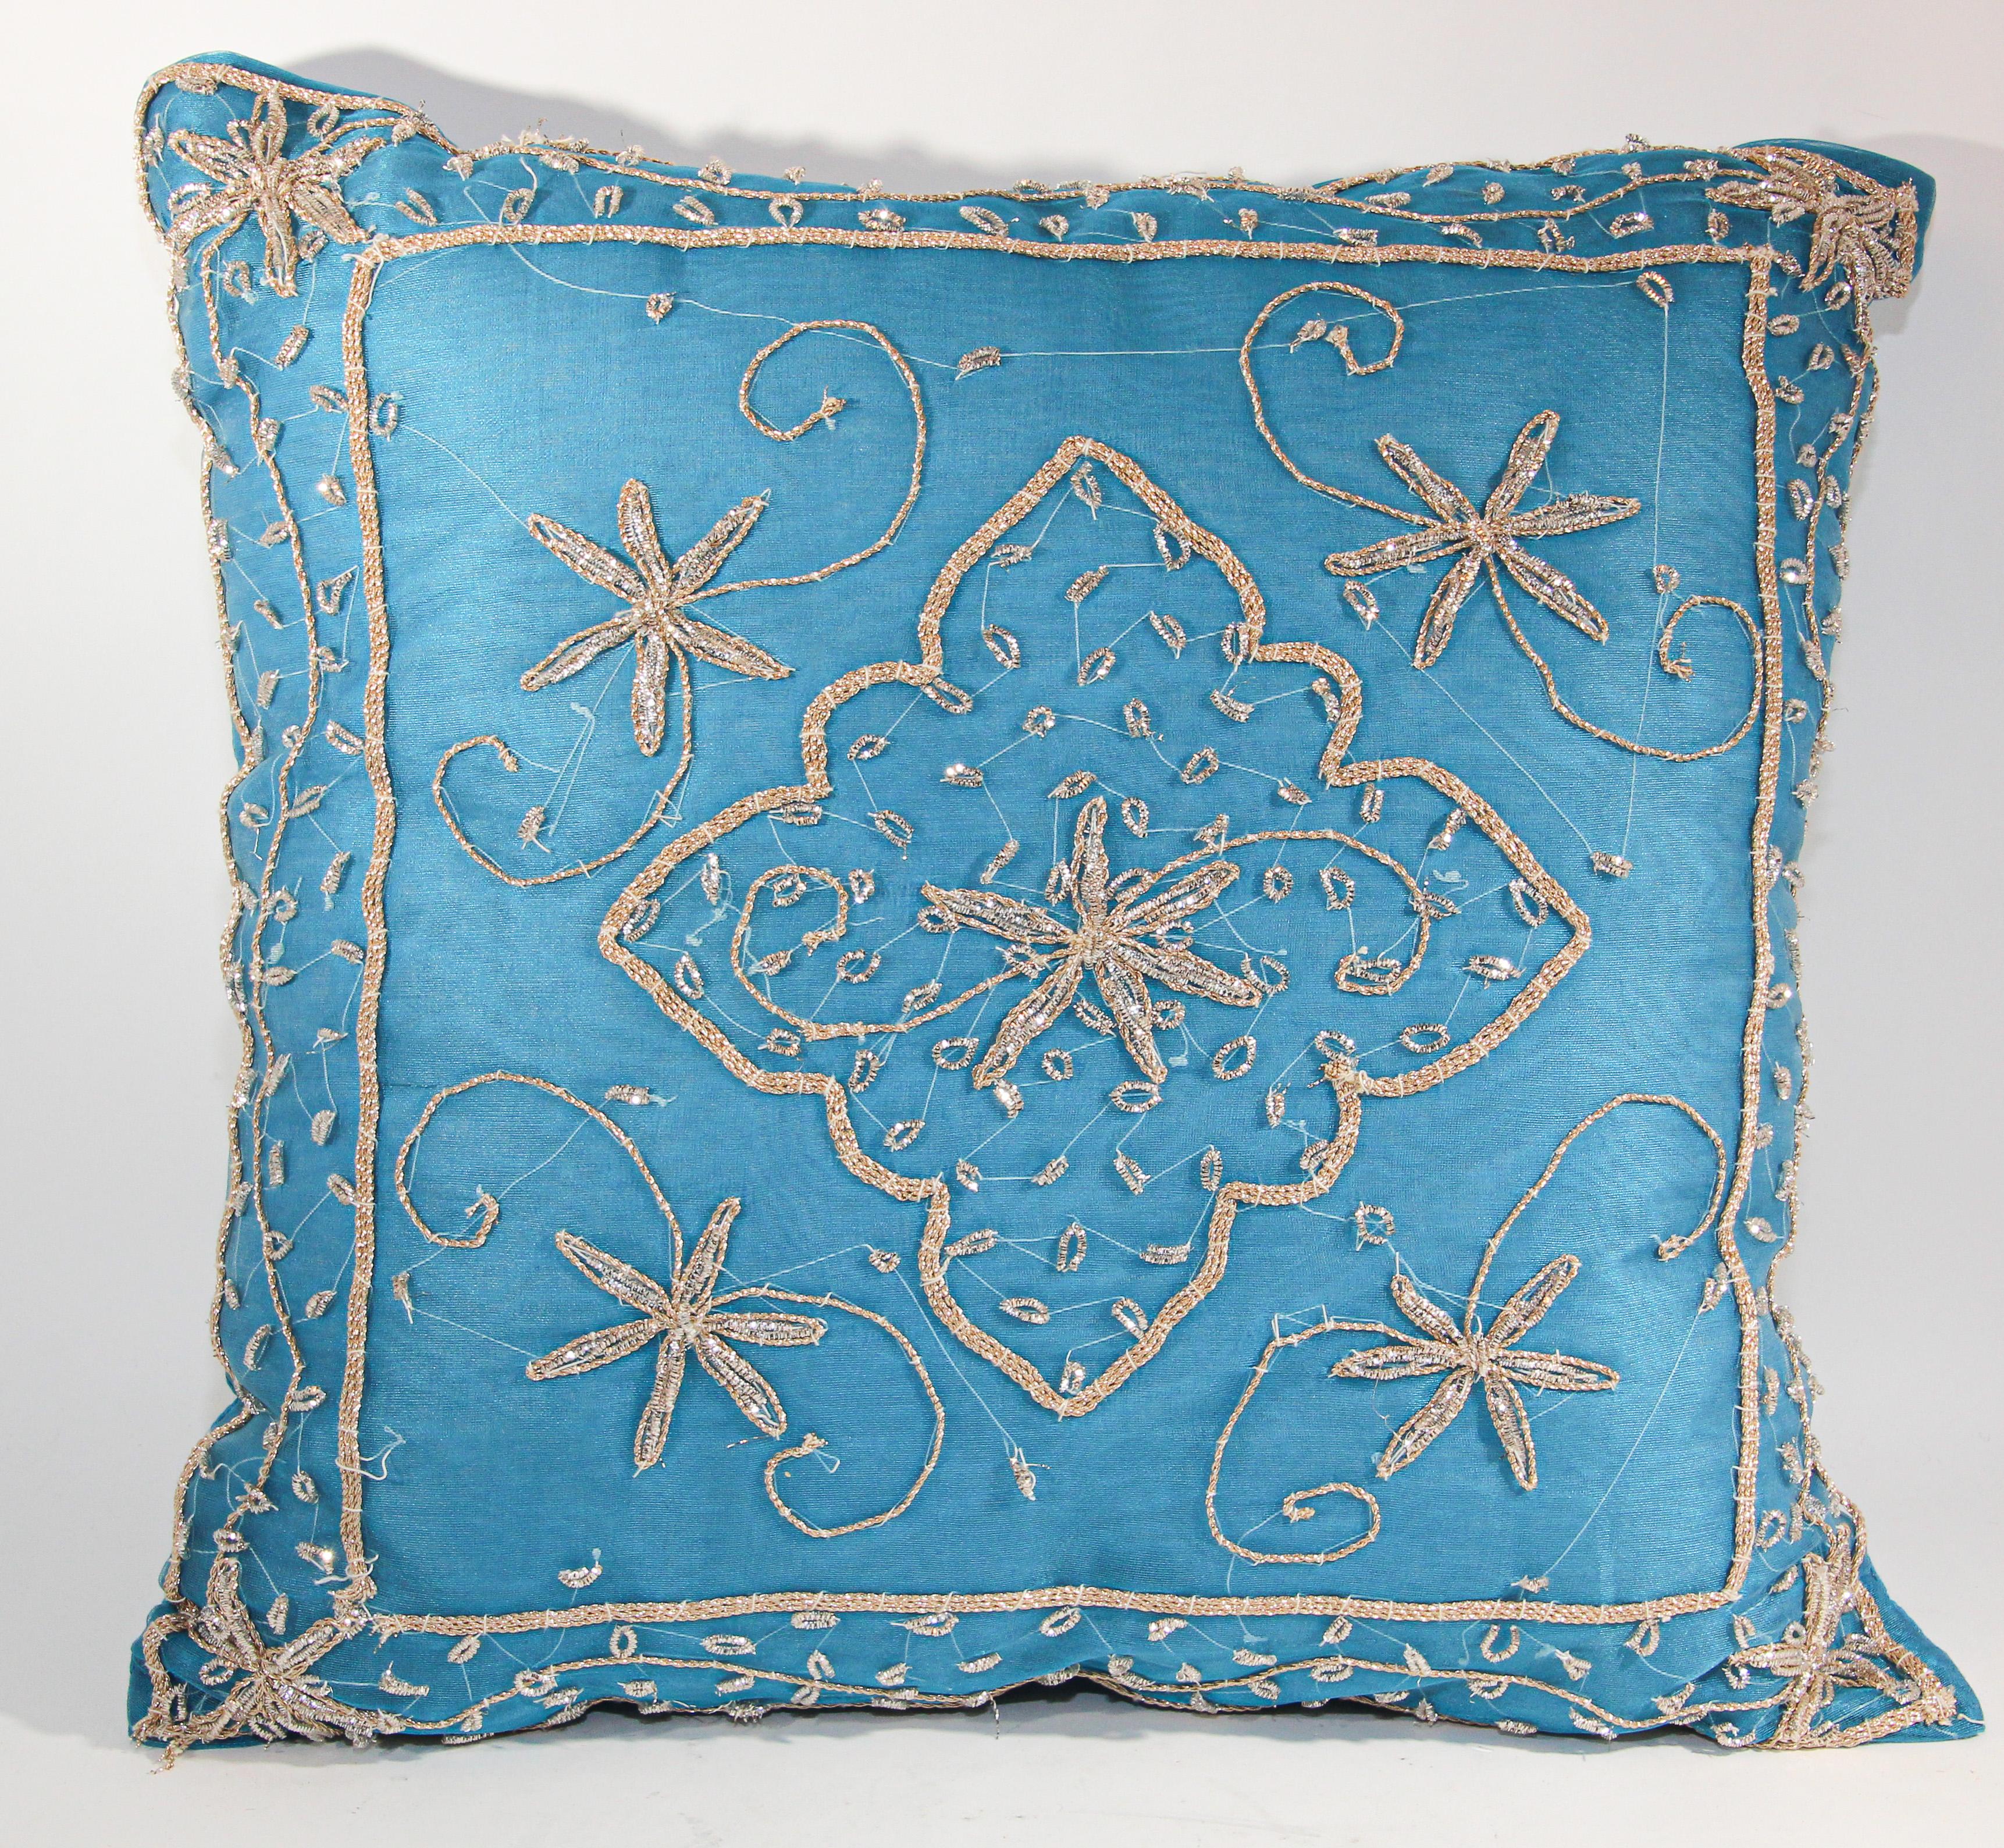 Moorish throw decorative accent pillow turquoise embroidered and embellished with sequins with metallic threads, gold beads embroidery on turquoise.
Heavily embellished border of metallic embroidery Moorish threads, silver beads embroidery on blue